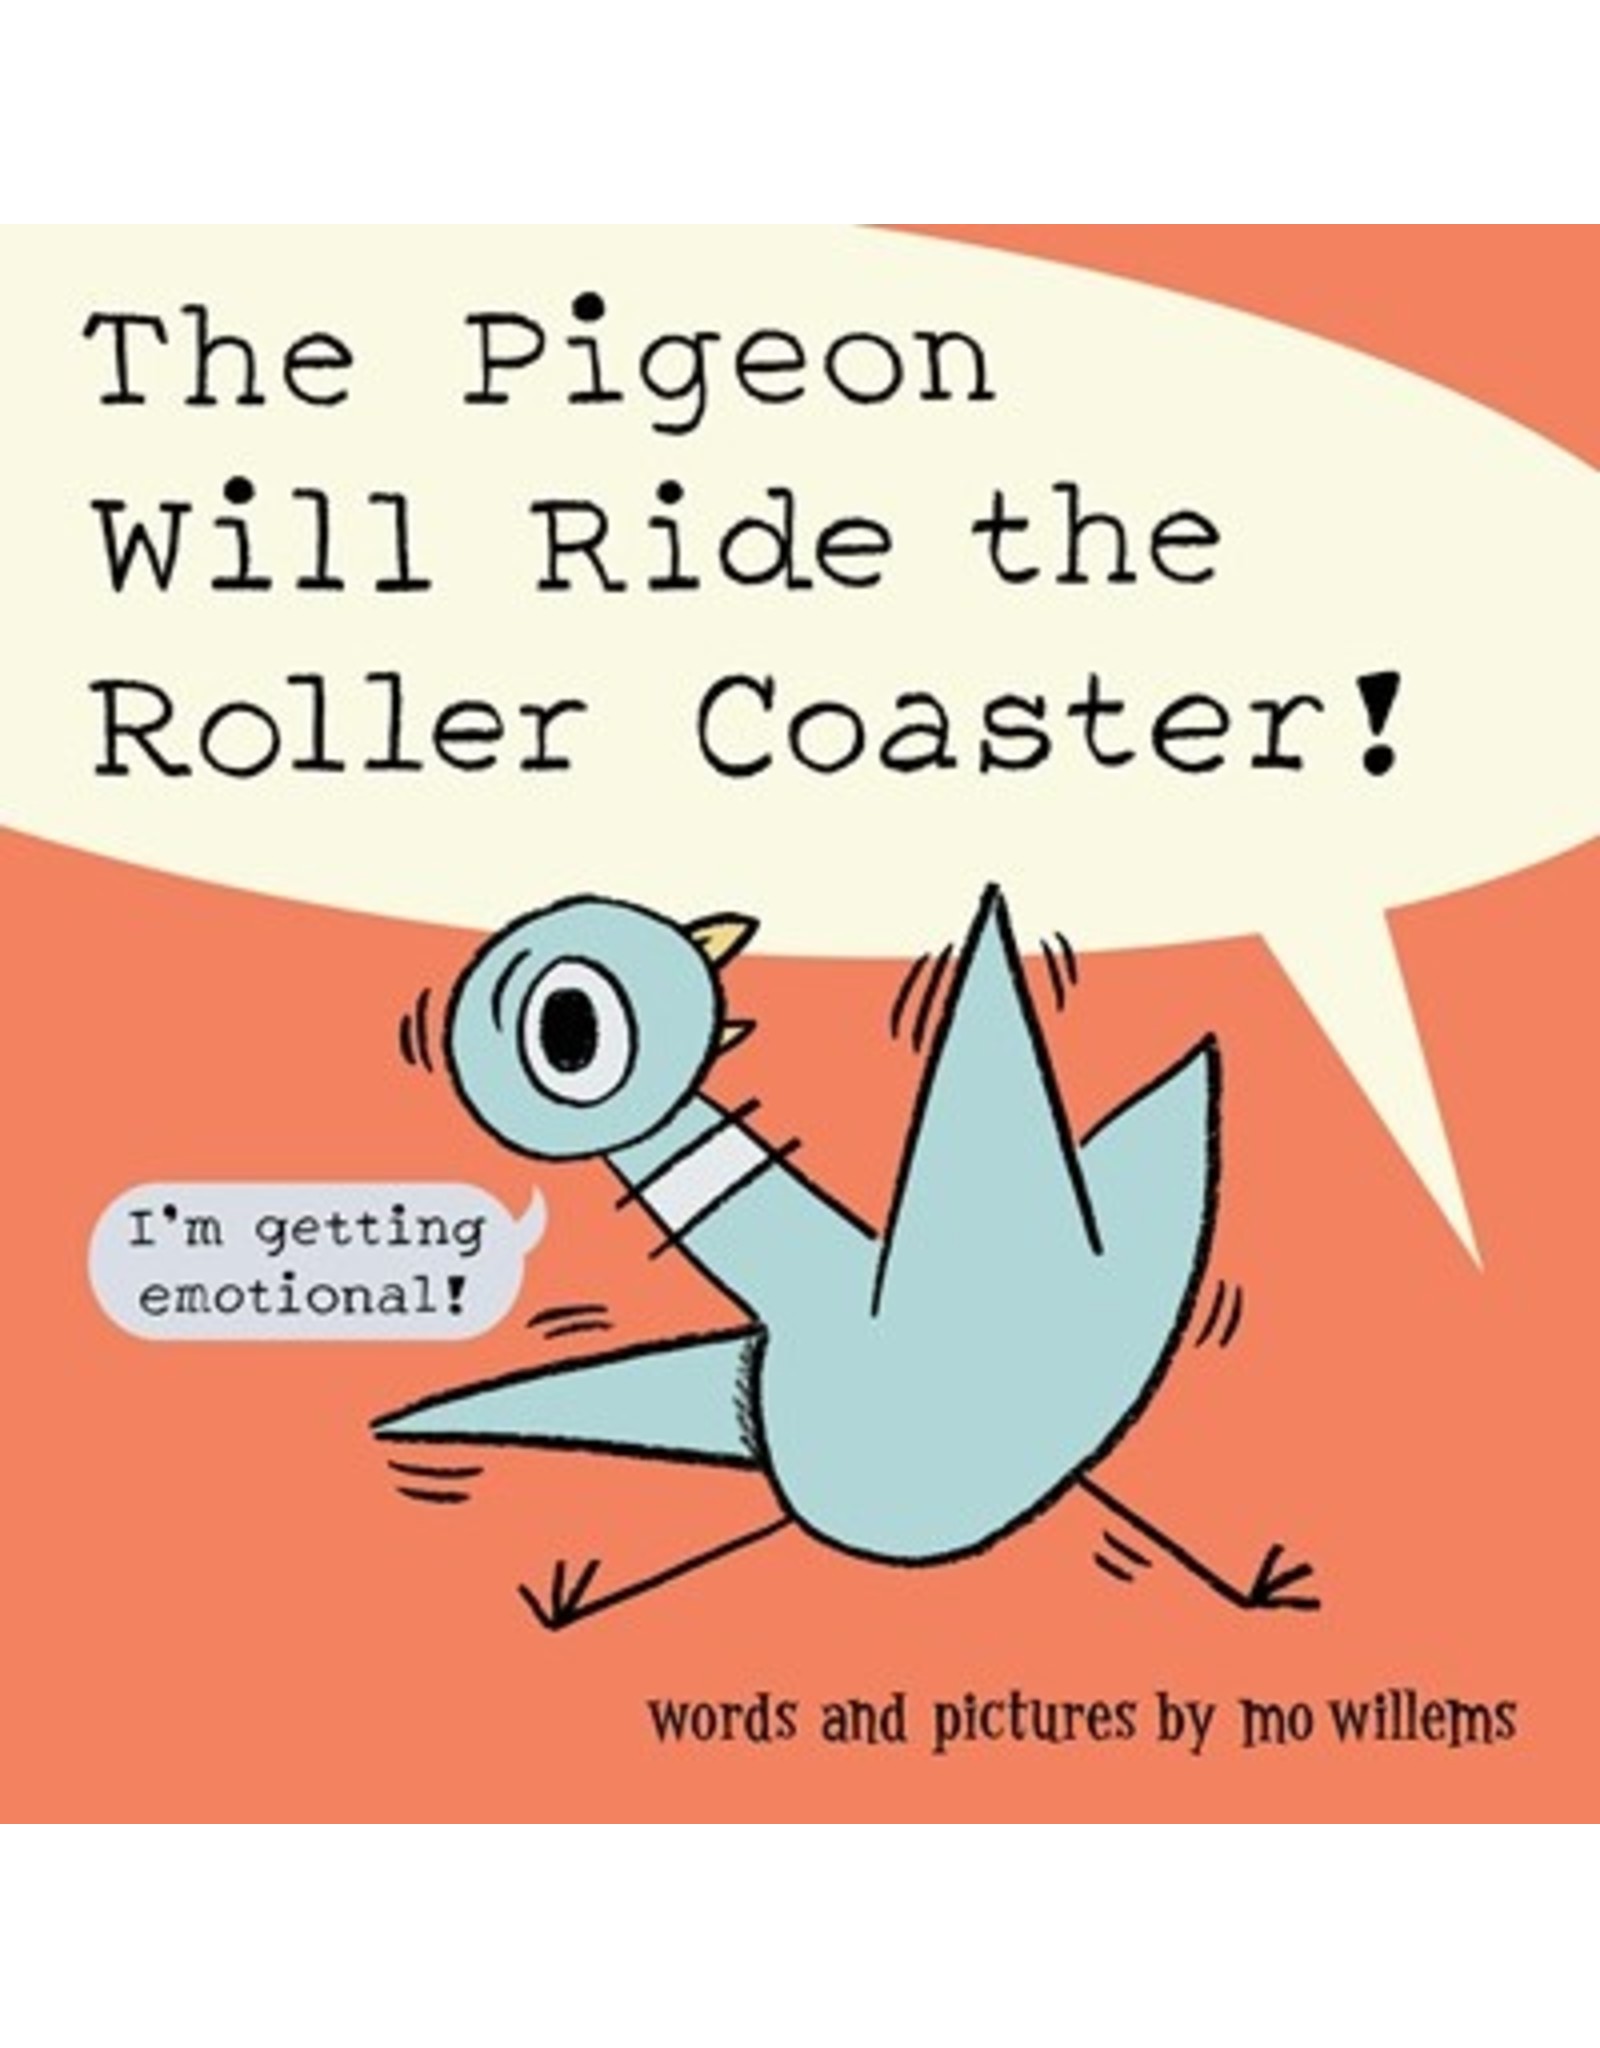 Books The Pigeon Will Ride the Rollar Coaster ! Words and Pictures by Mo Willems